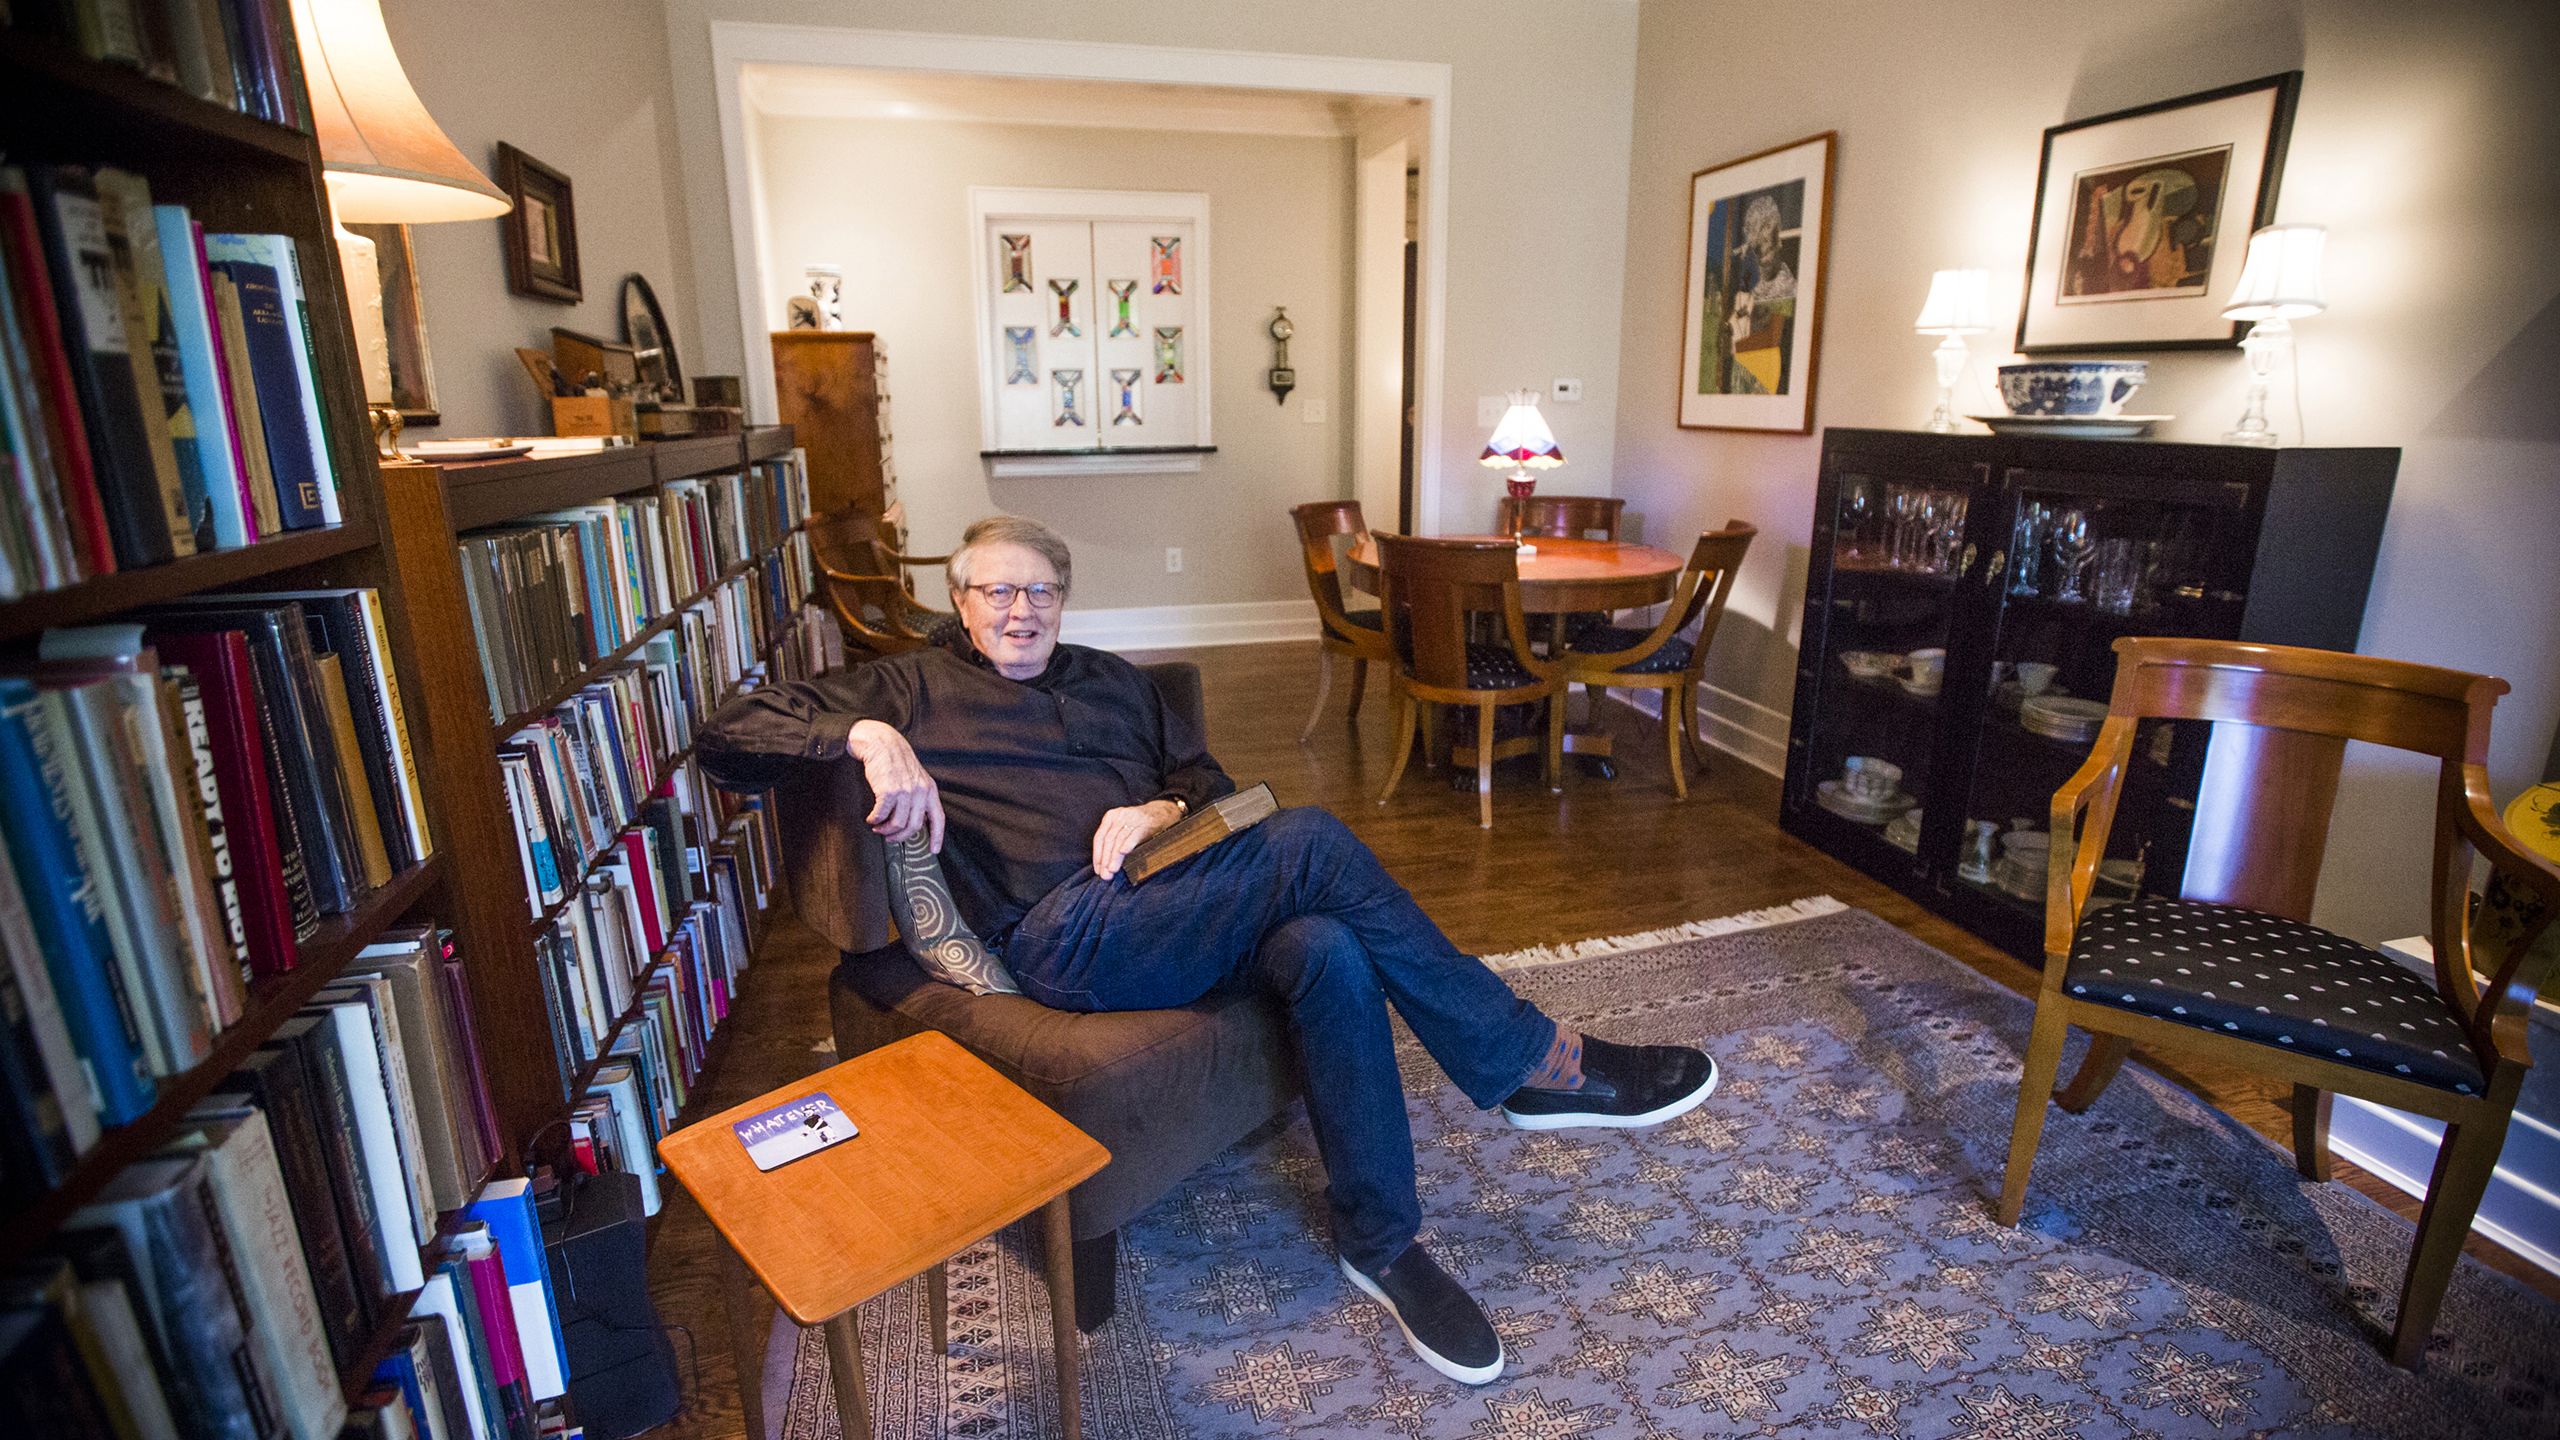 Burkett smiling and leaning back in a chair in his home library with his legs crossed and a book resting in his lap